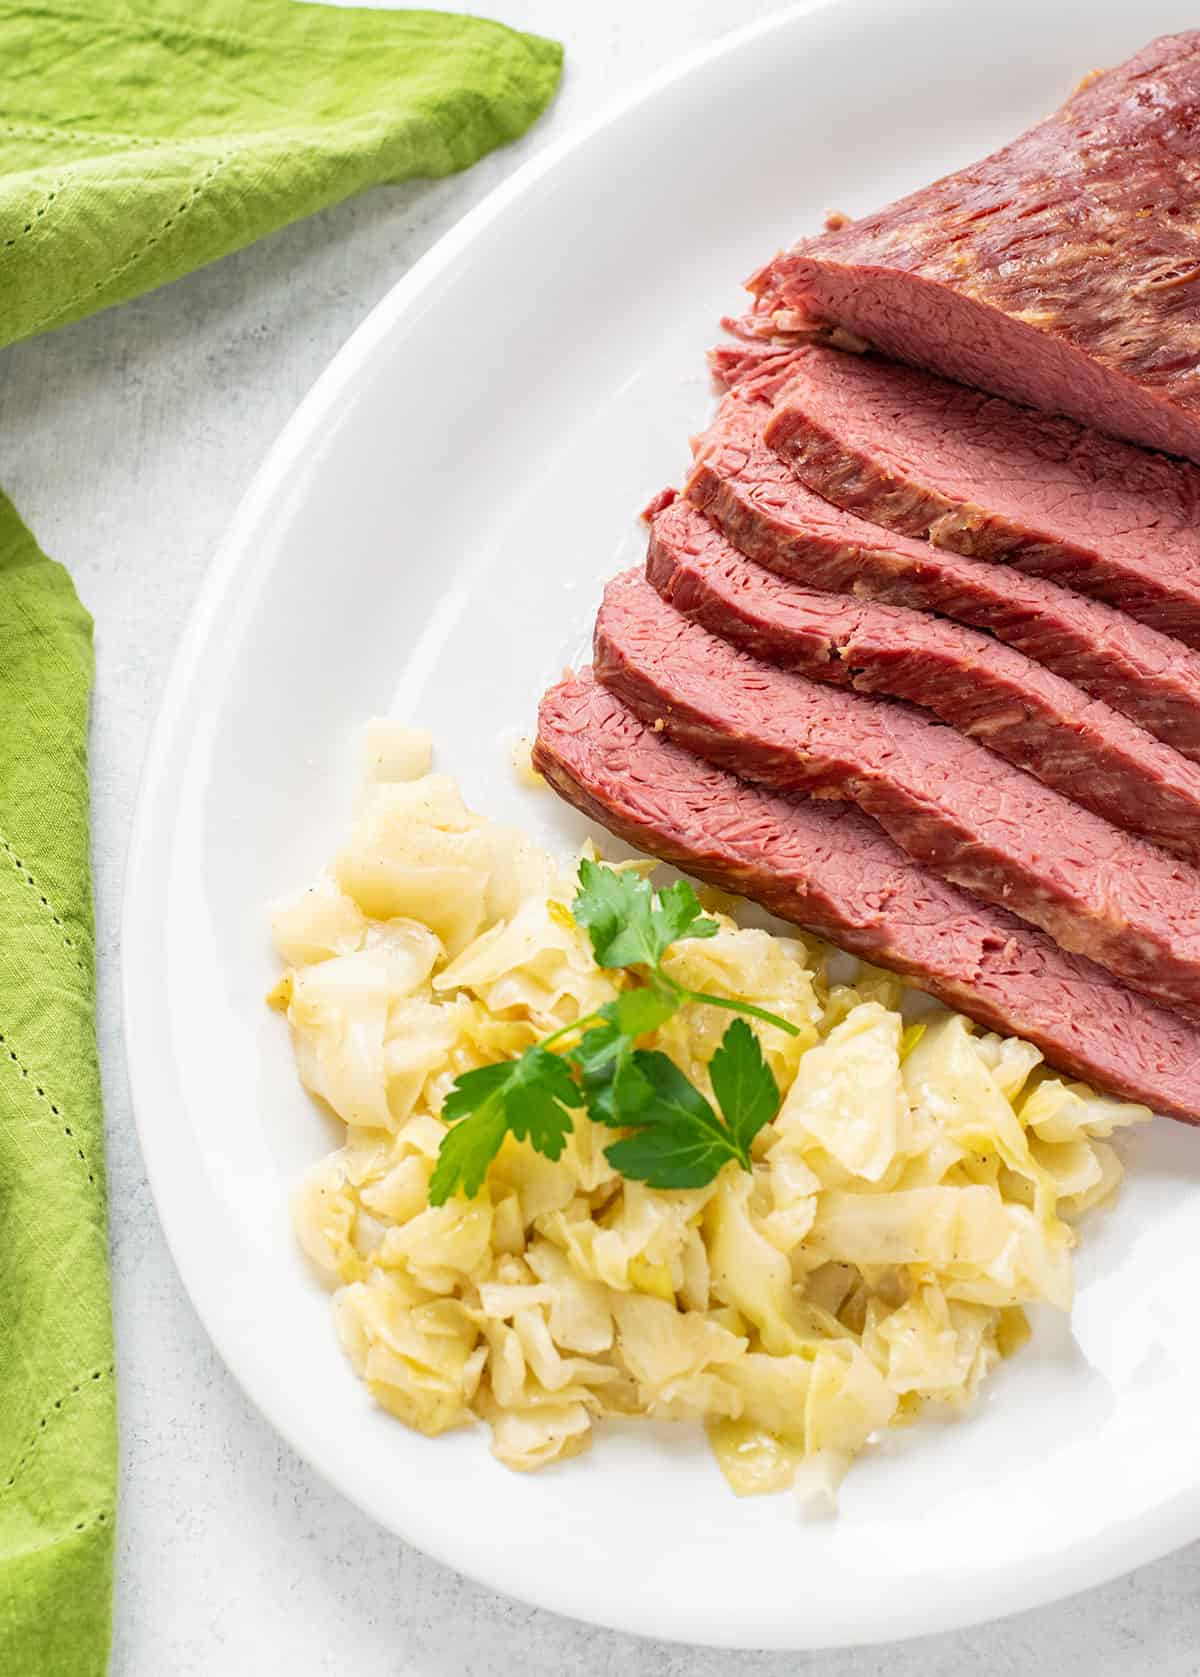 corned beef brisket sliced on a platter with sautéed cabbage